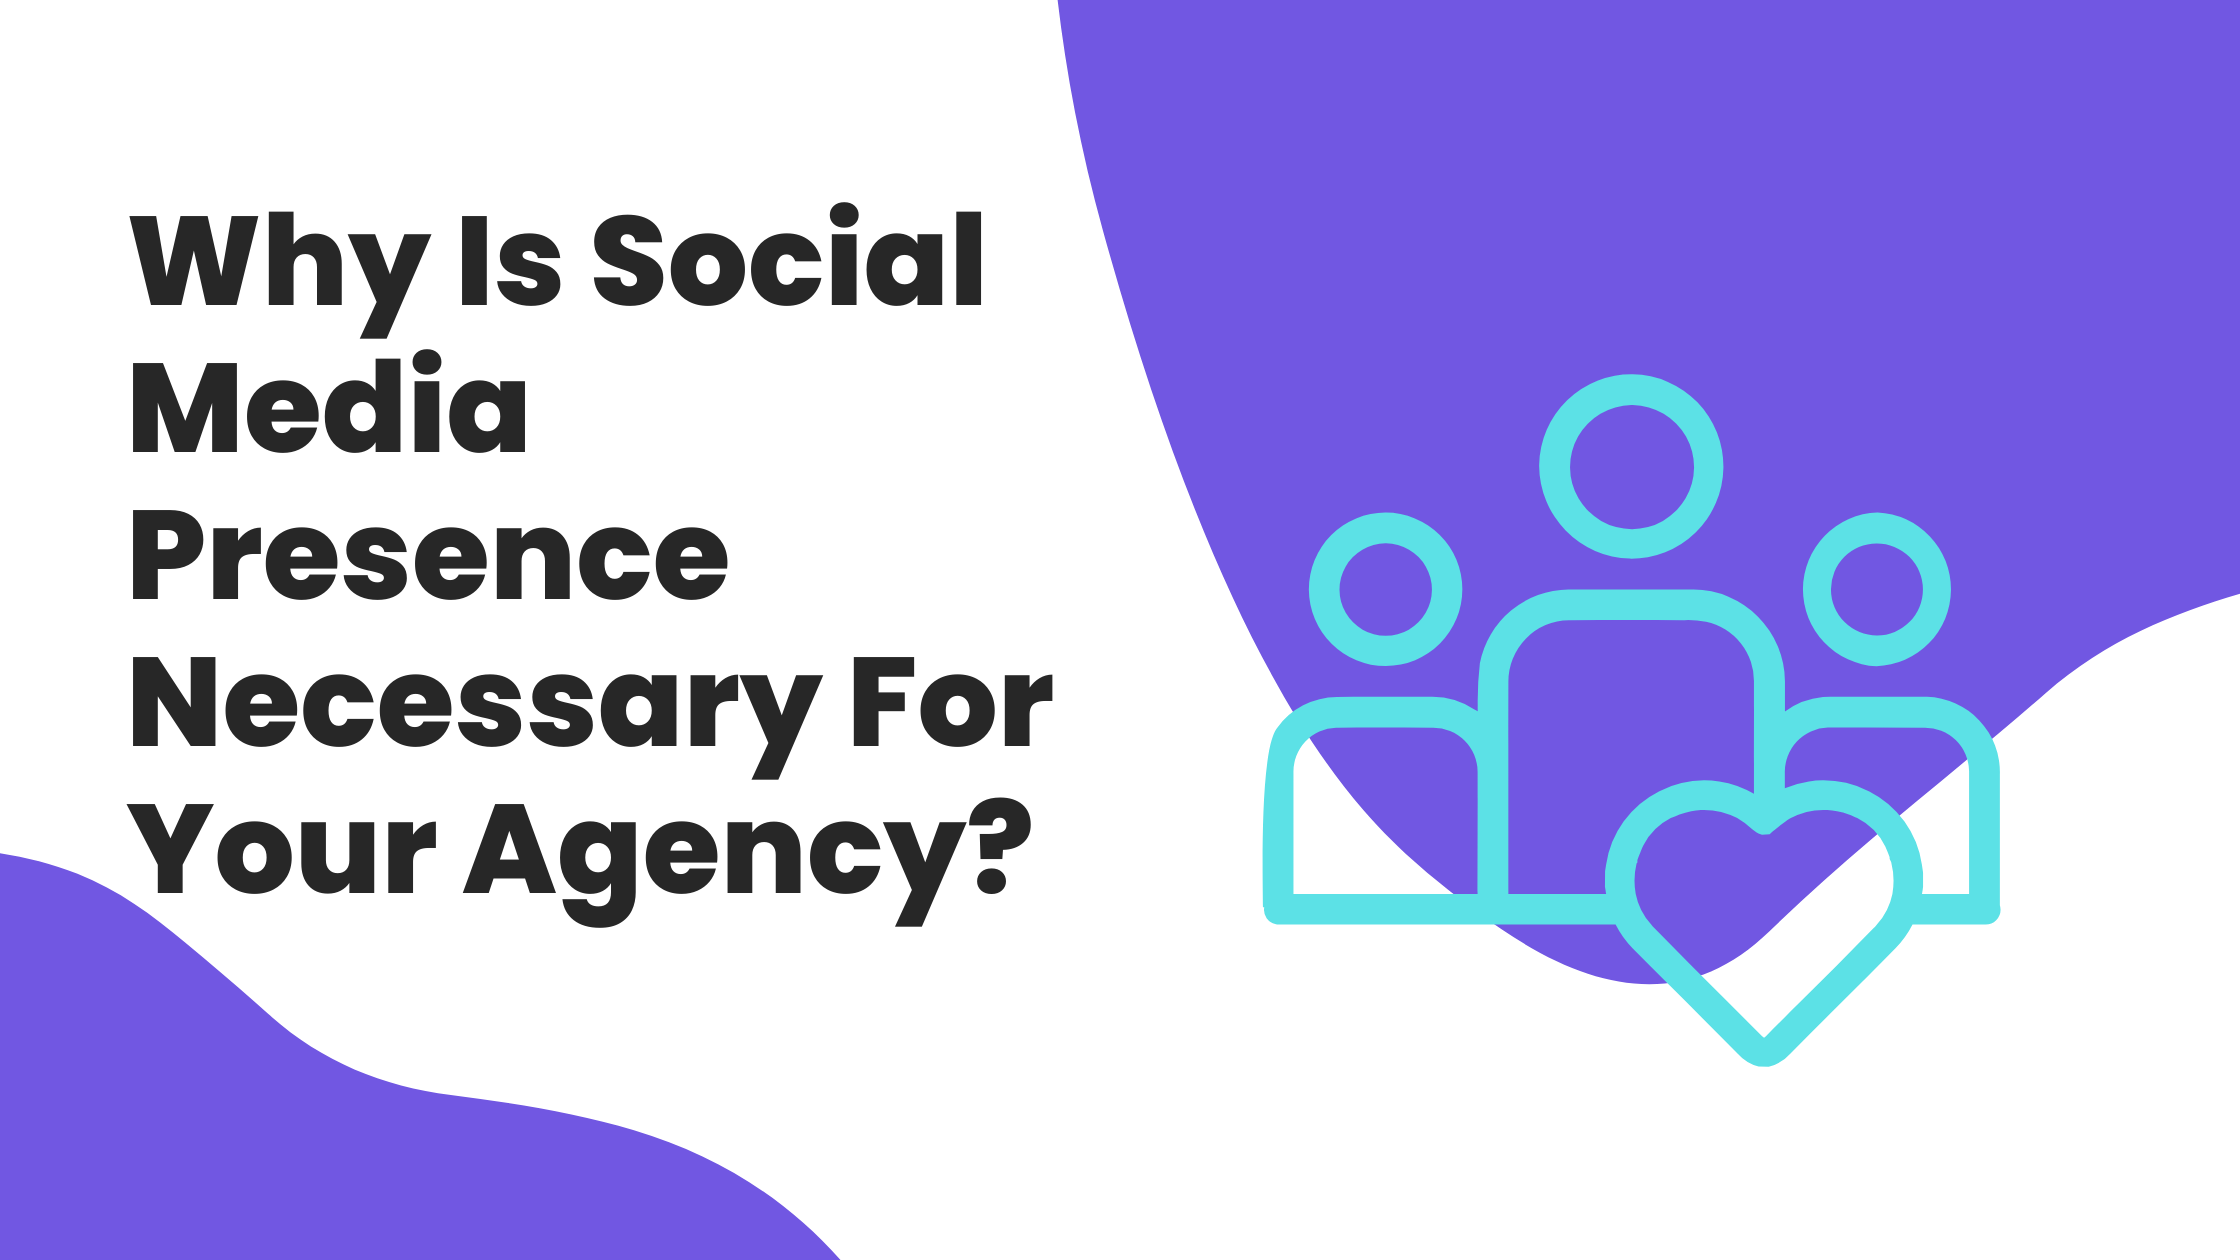 Why Is Social Media Presence Necessary For Your Agency?